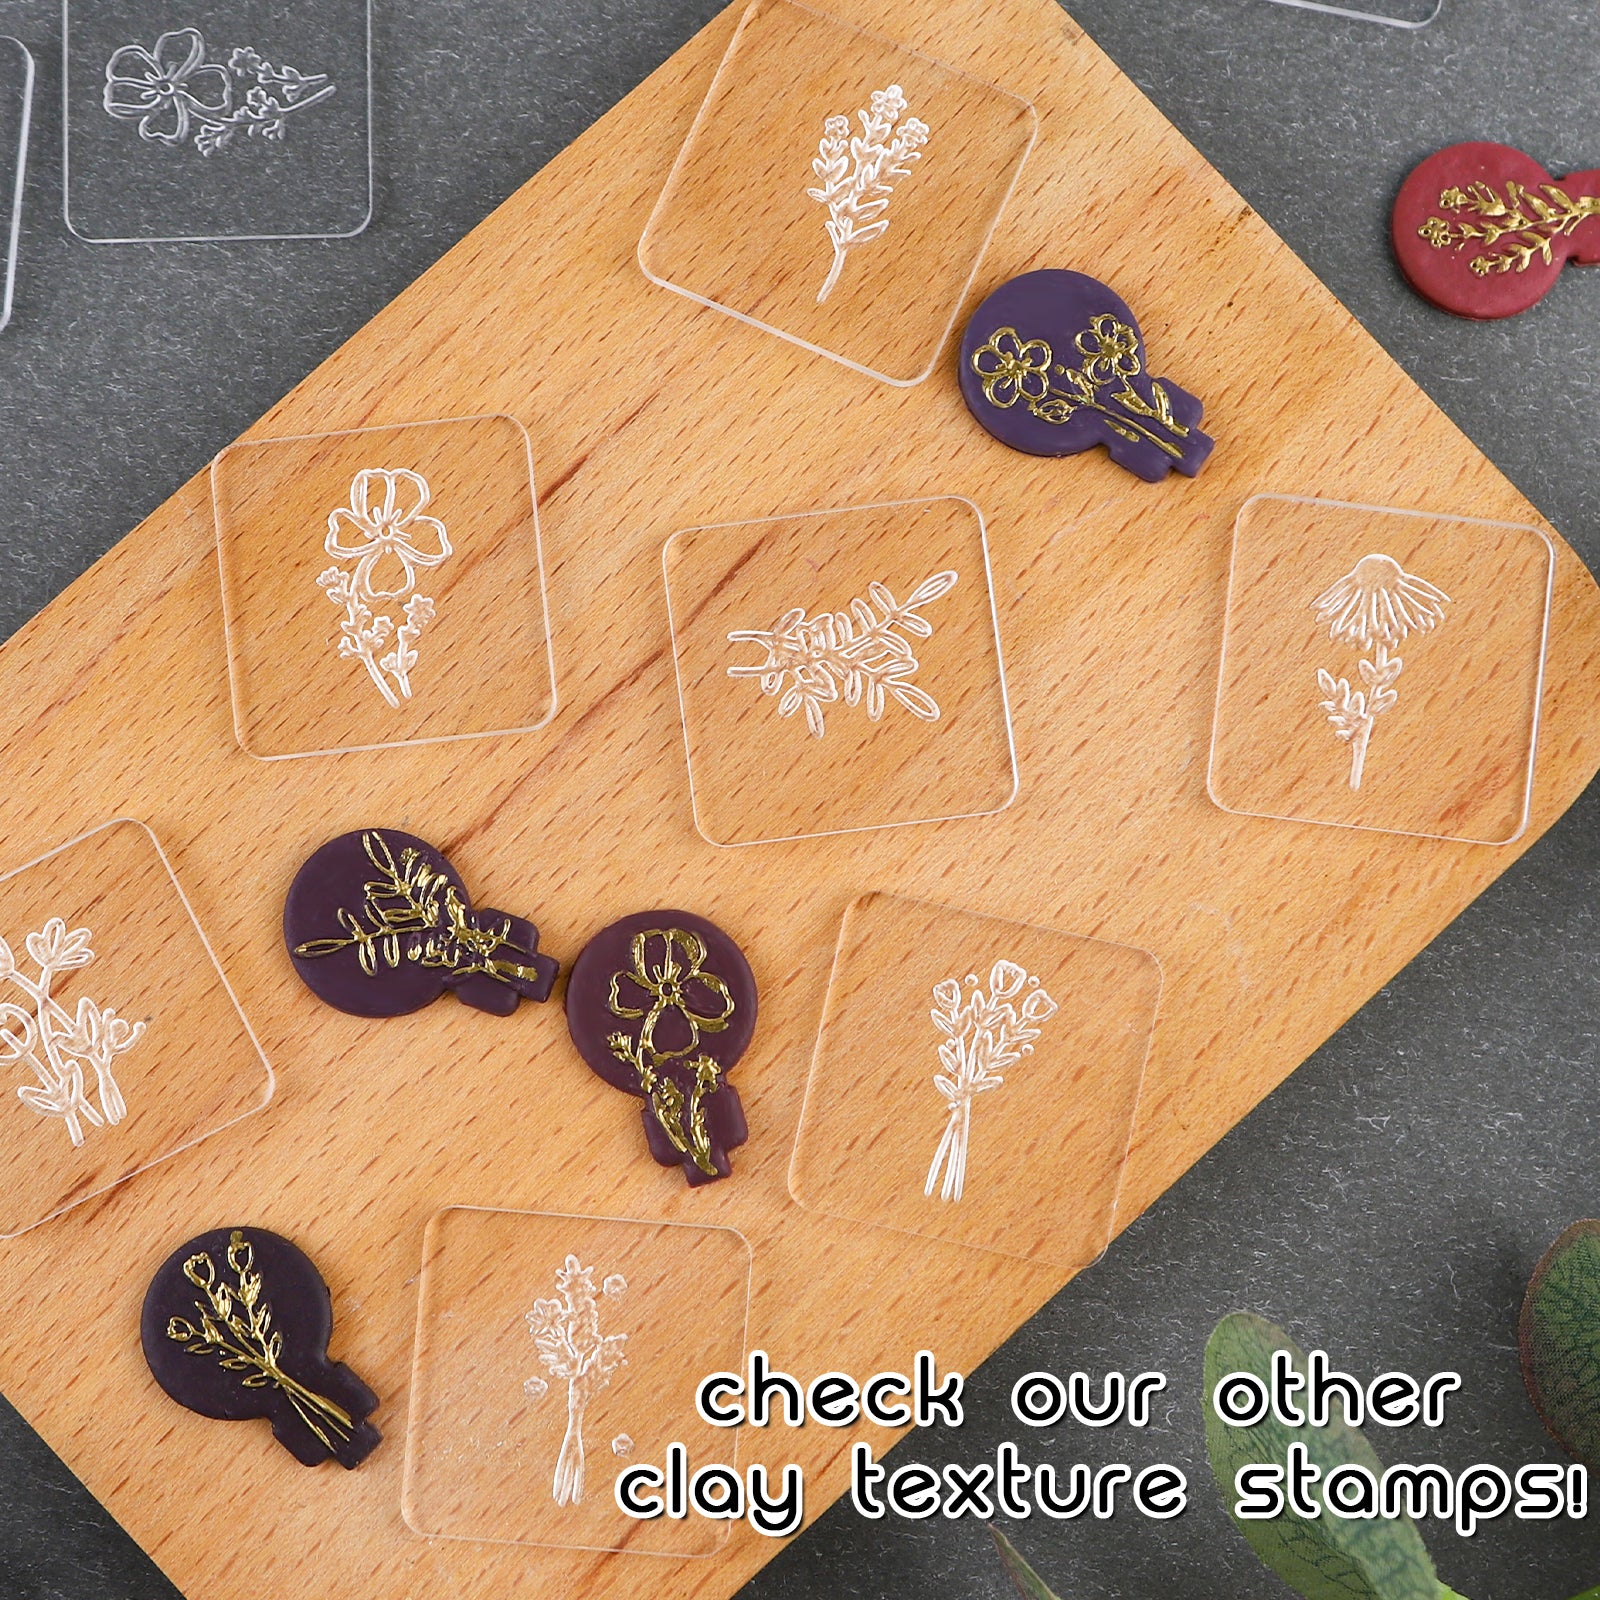 Puocaon Floral Clay Texture Stamps 12 Pcs with Bulb Clay Cutter